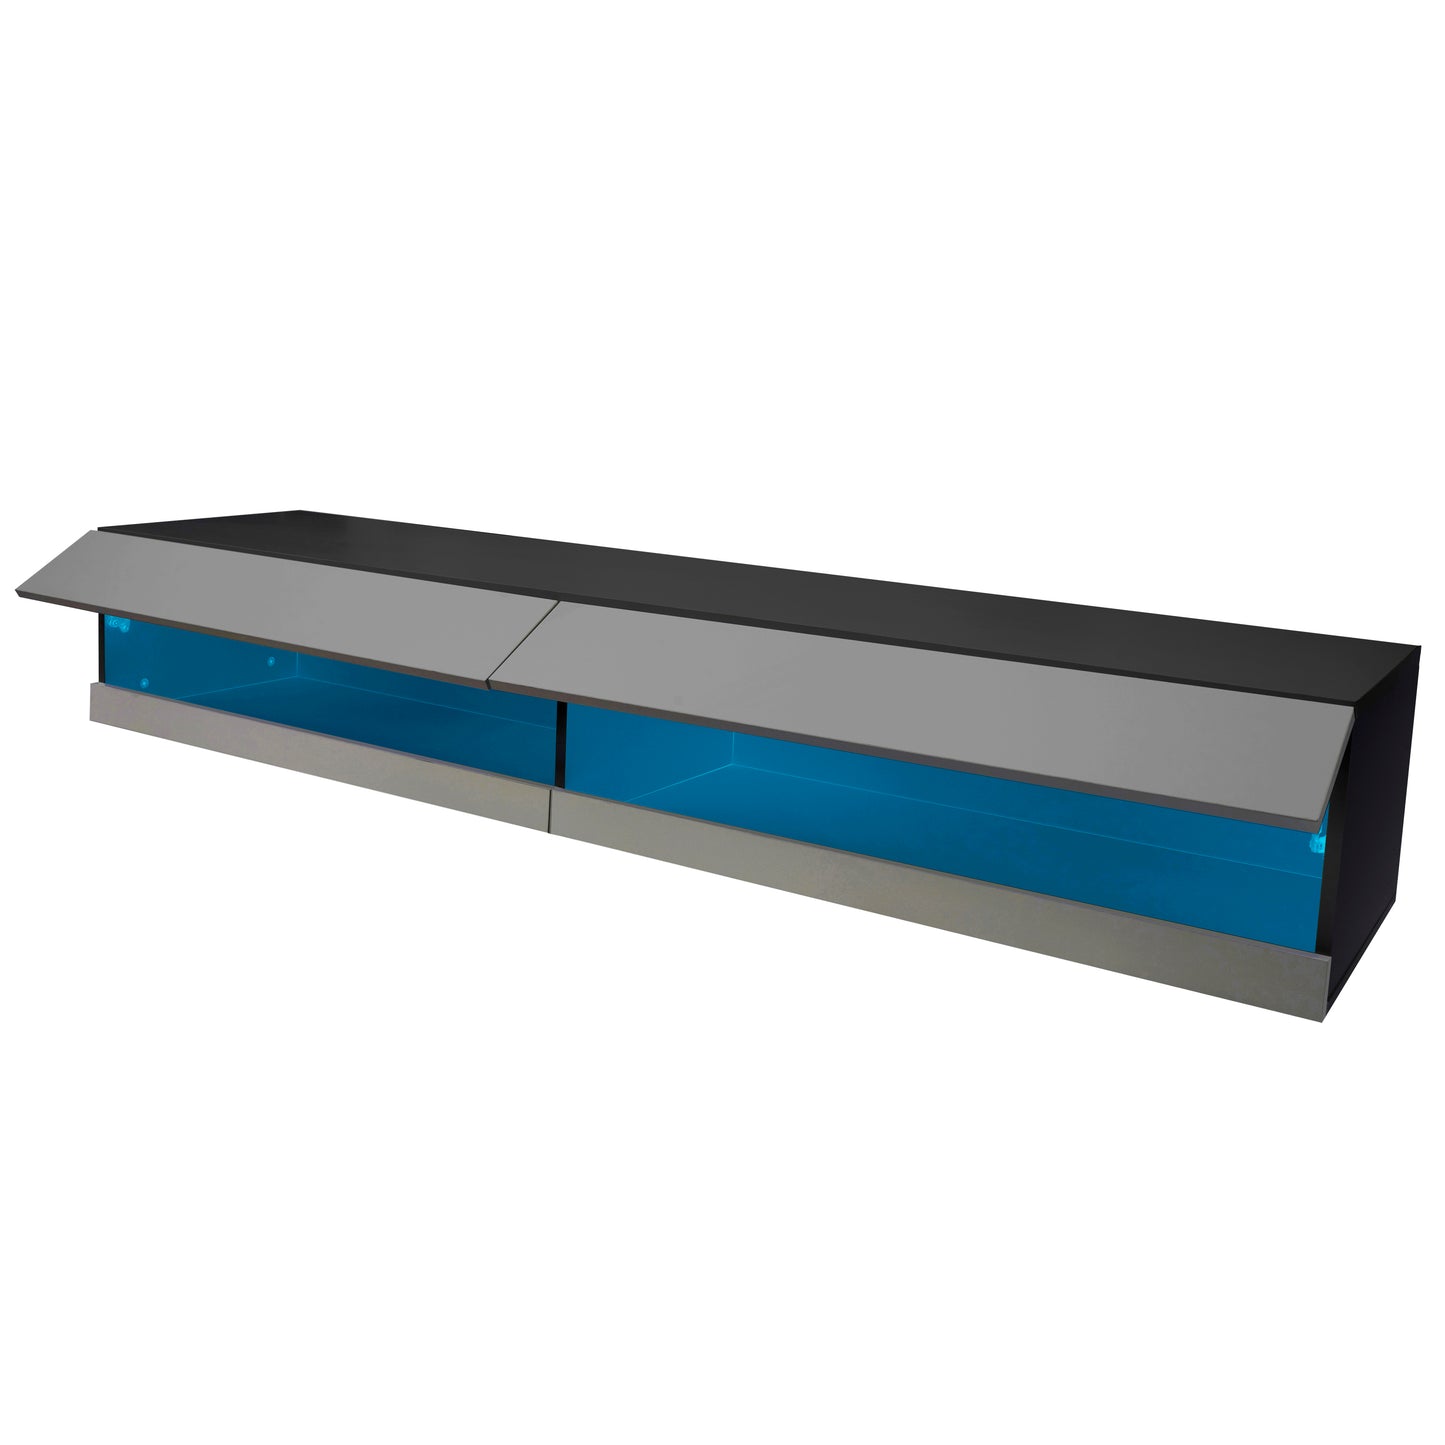 Lucid Wall Mounted Floating 80" TV Stand with 20 Color LEDs in Black and Grey